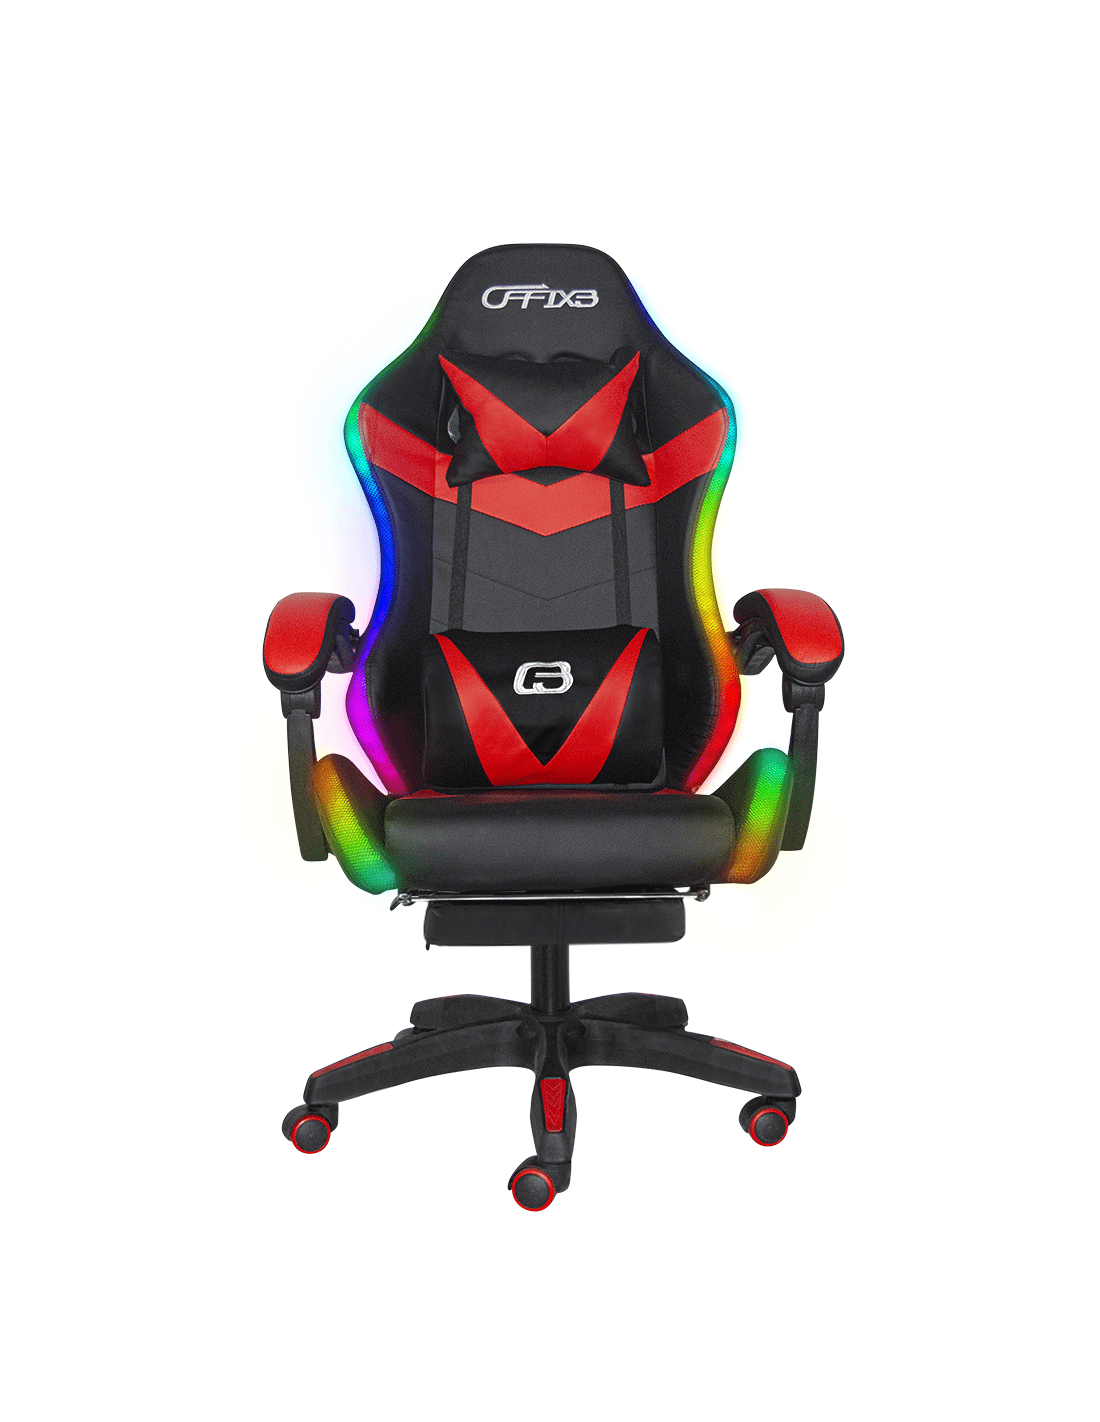 Poltrona Gaming con LED RGB in Ecopelle NERA ROSSA